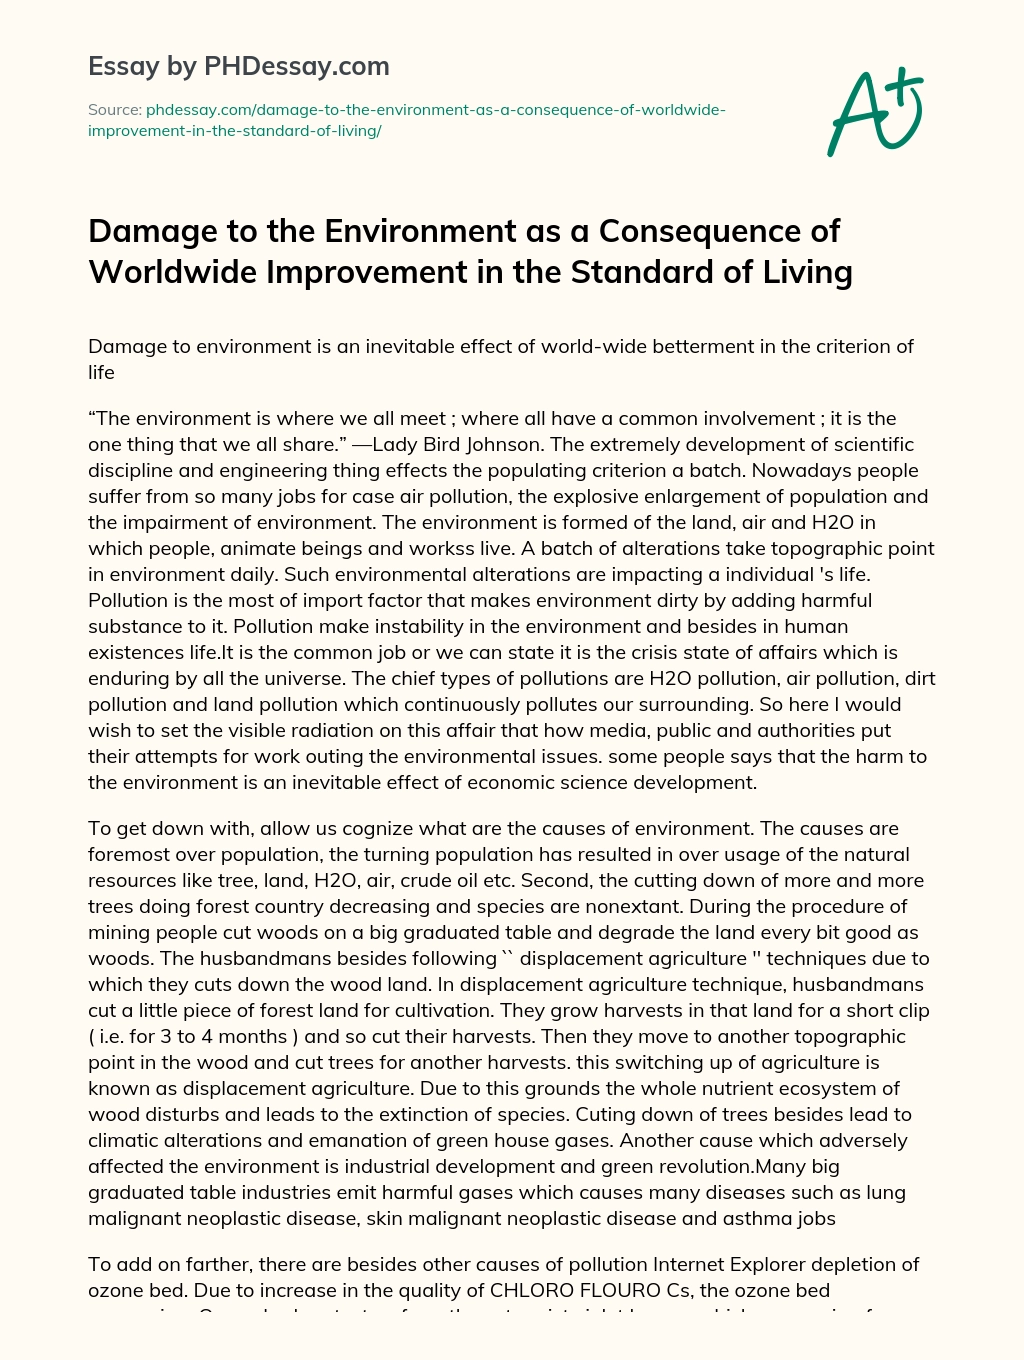 Damage to the Environment as a Consequence of Worldwide Improvement in the Standard of Living essay